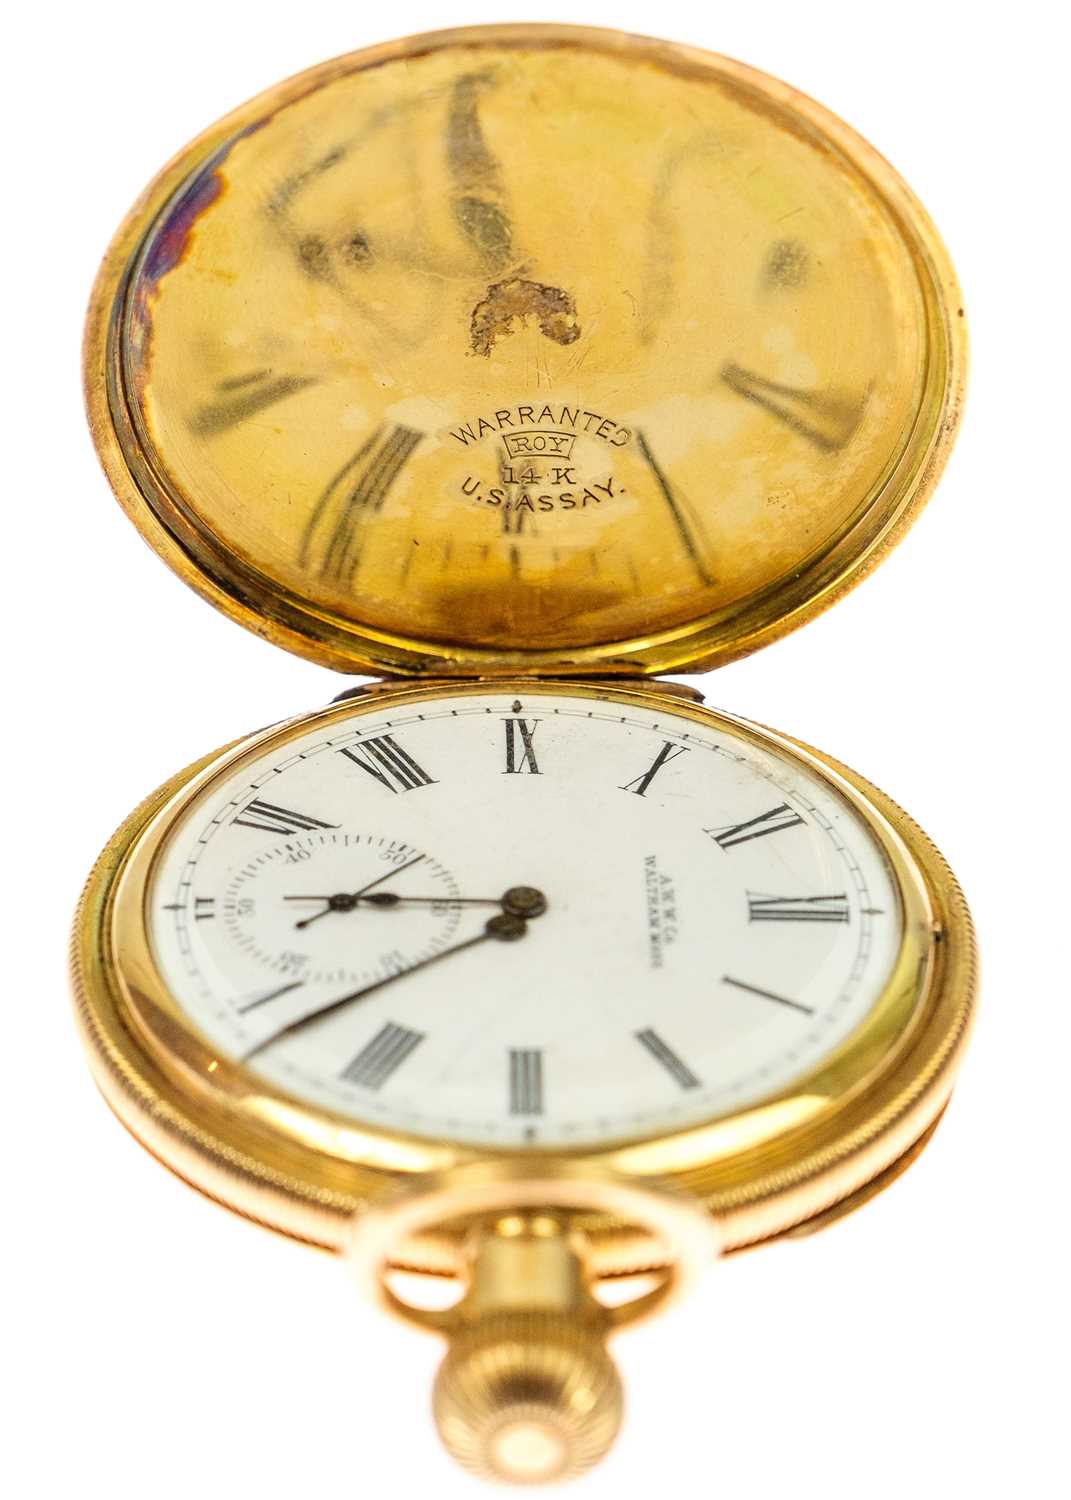 WALTHAM - A 14ct full hunter crown wind pocket watch. - Image 7 of 7